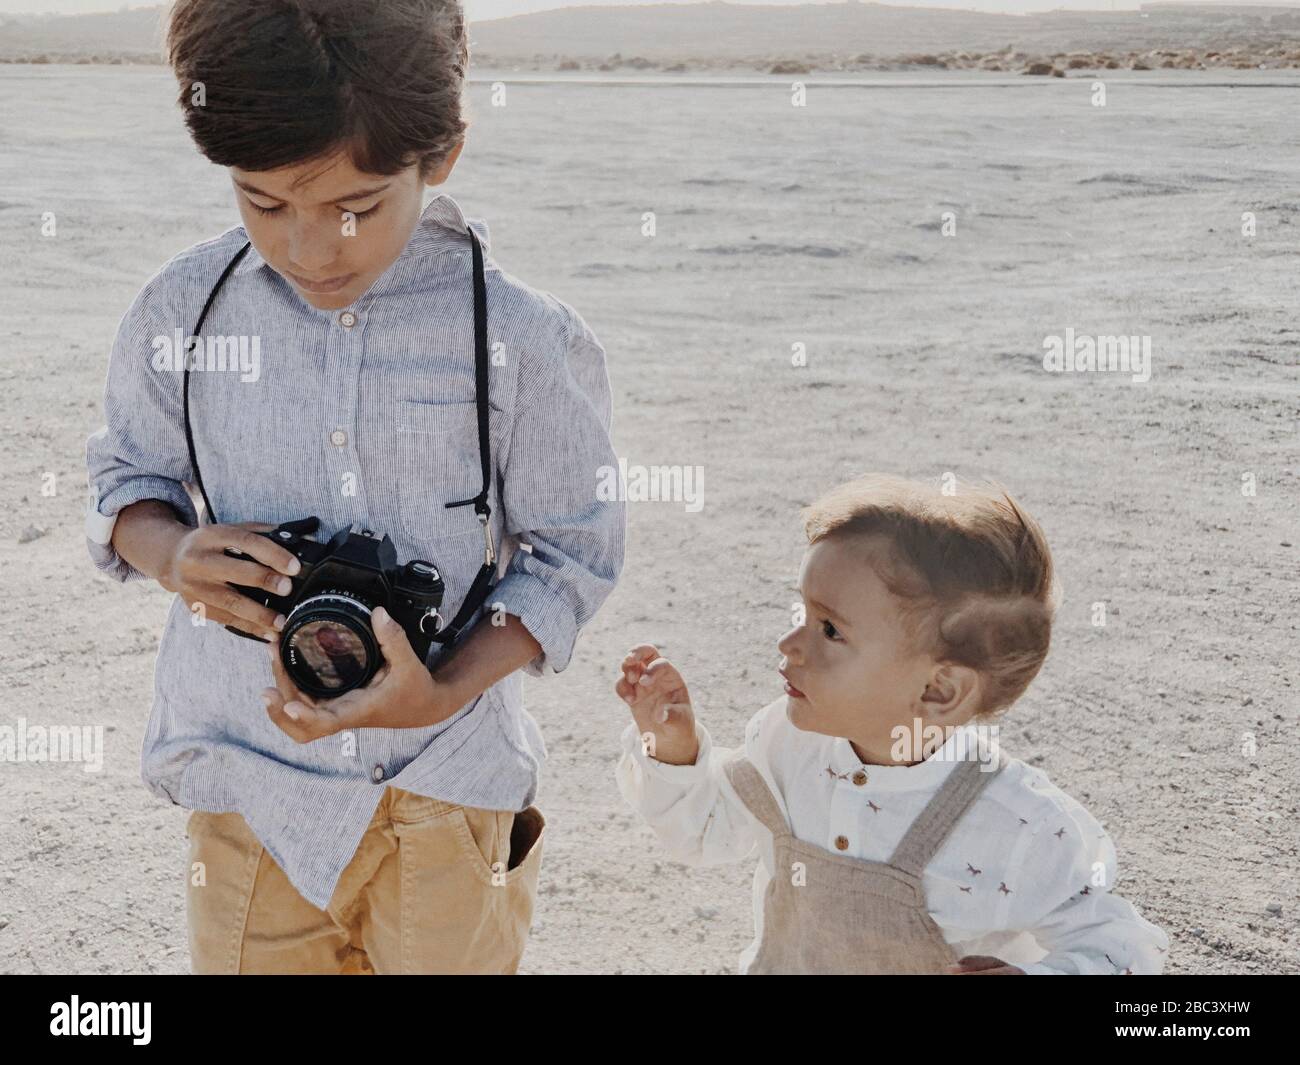 A kid holds a camera and a younger kid stands next to  me Stock Photo